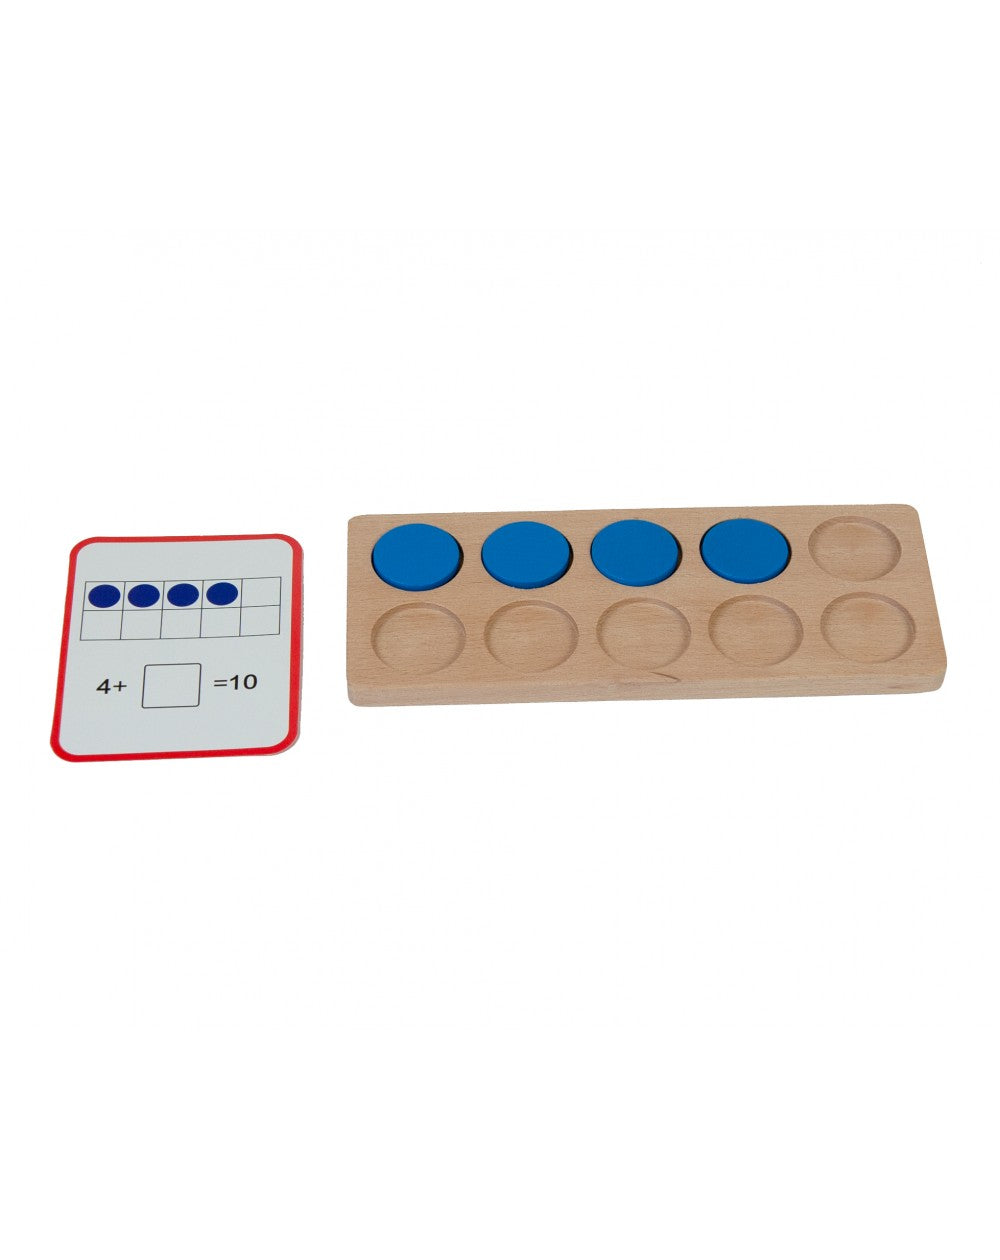 TOKENS COUNTING BOARD